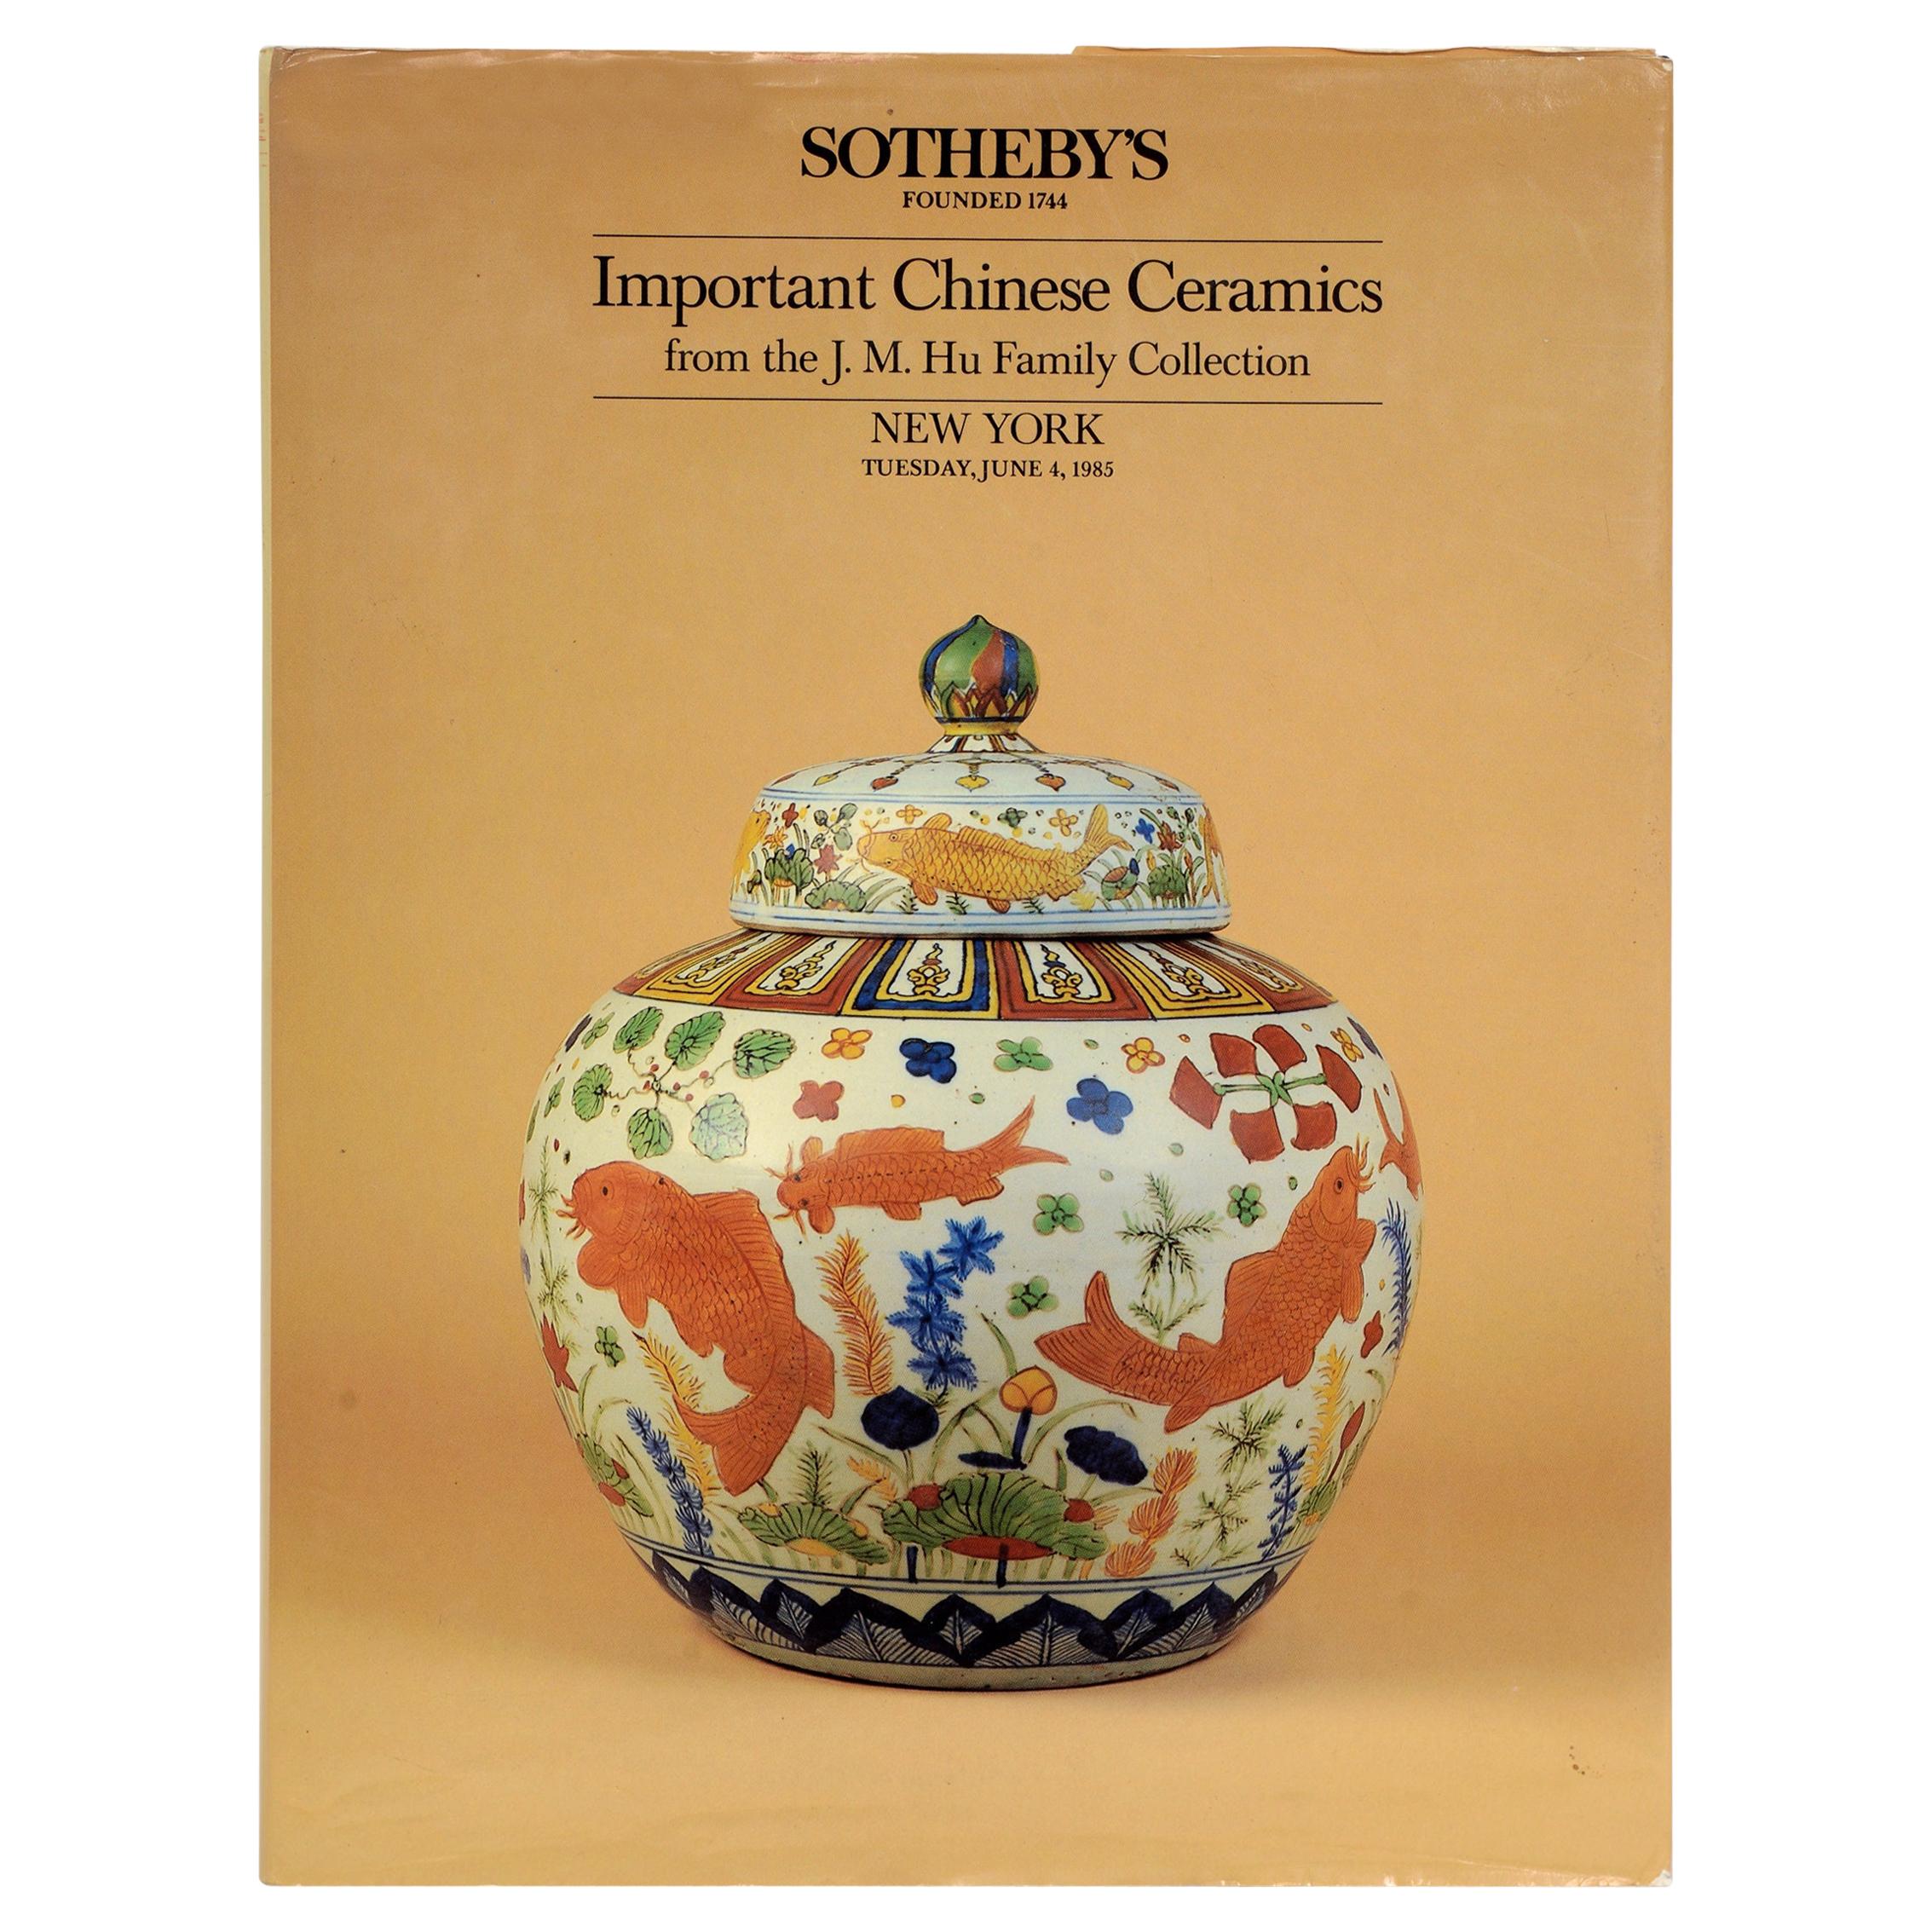 Sotheby's Important Chinese Ceramics from the J. M. Hu Family Collection, 1985